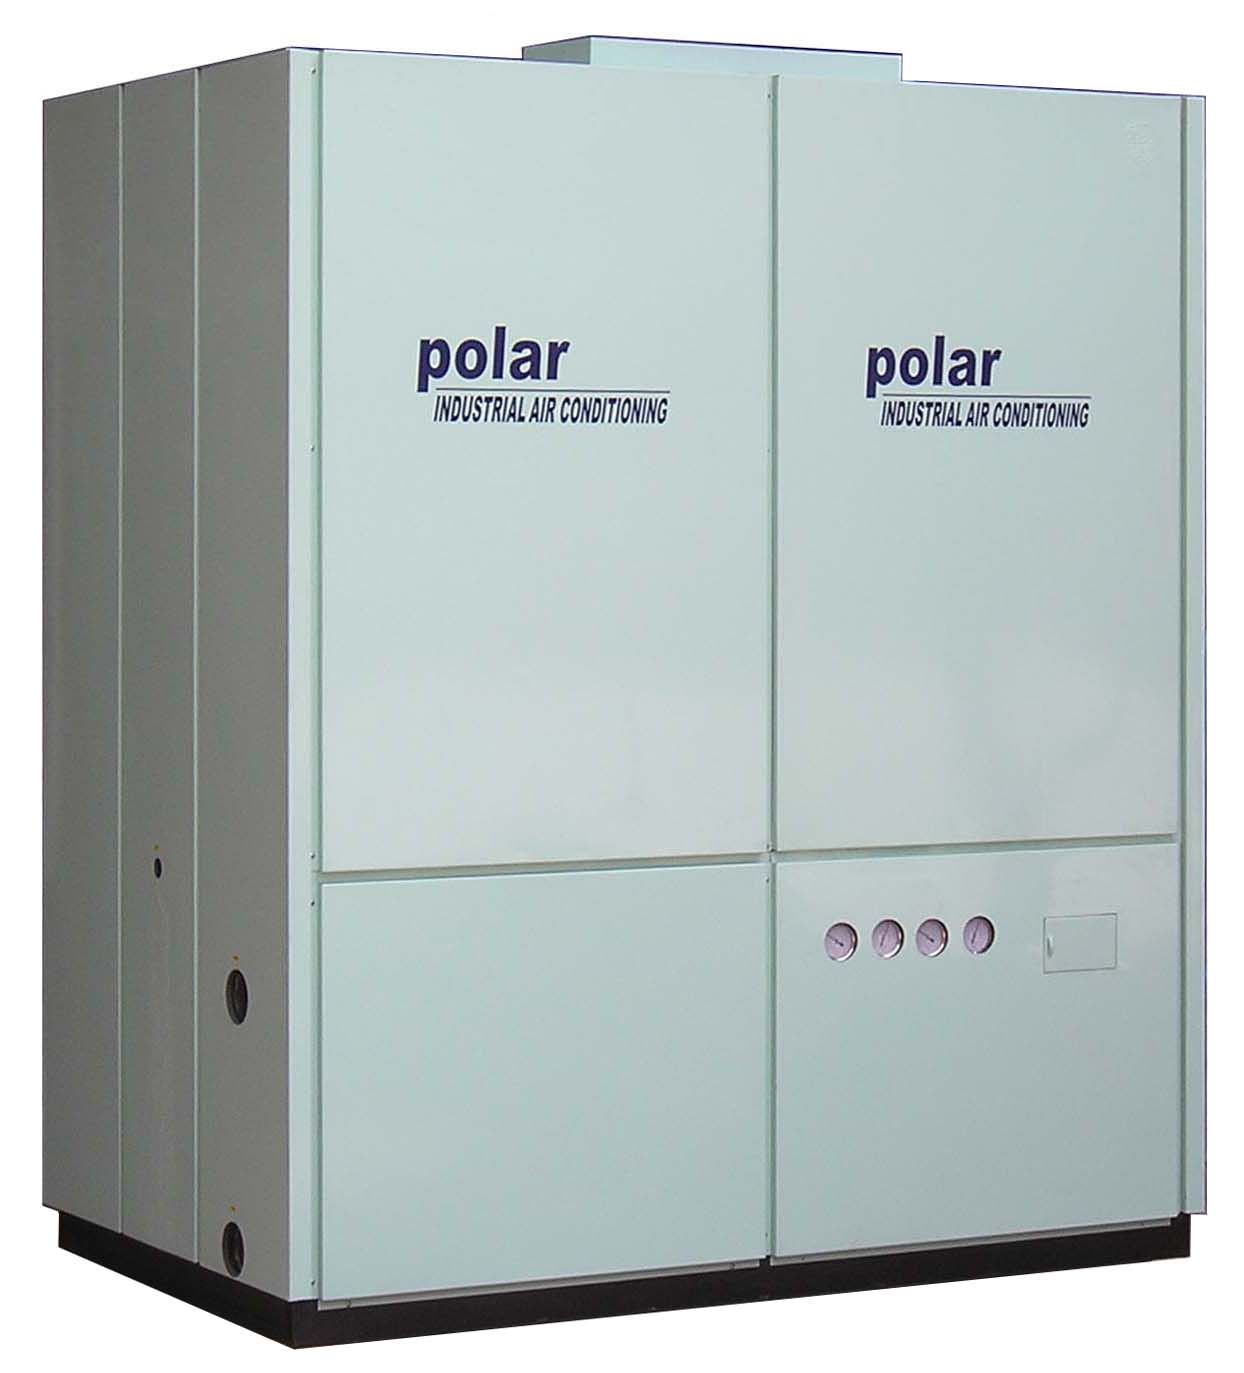 polar industrial air condition & water-cooled air condition